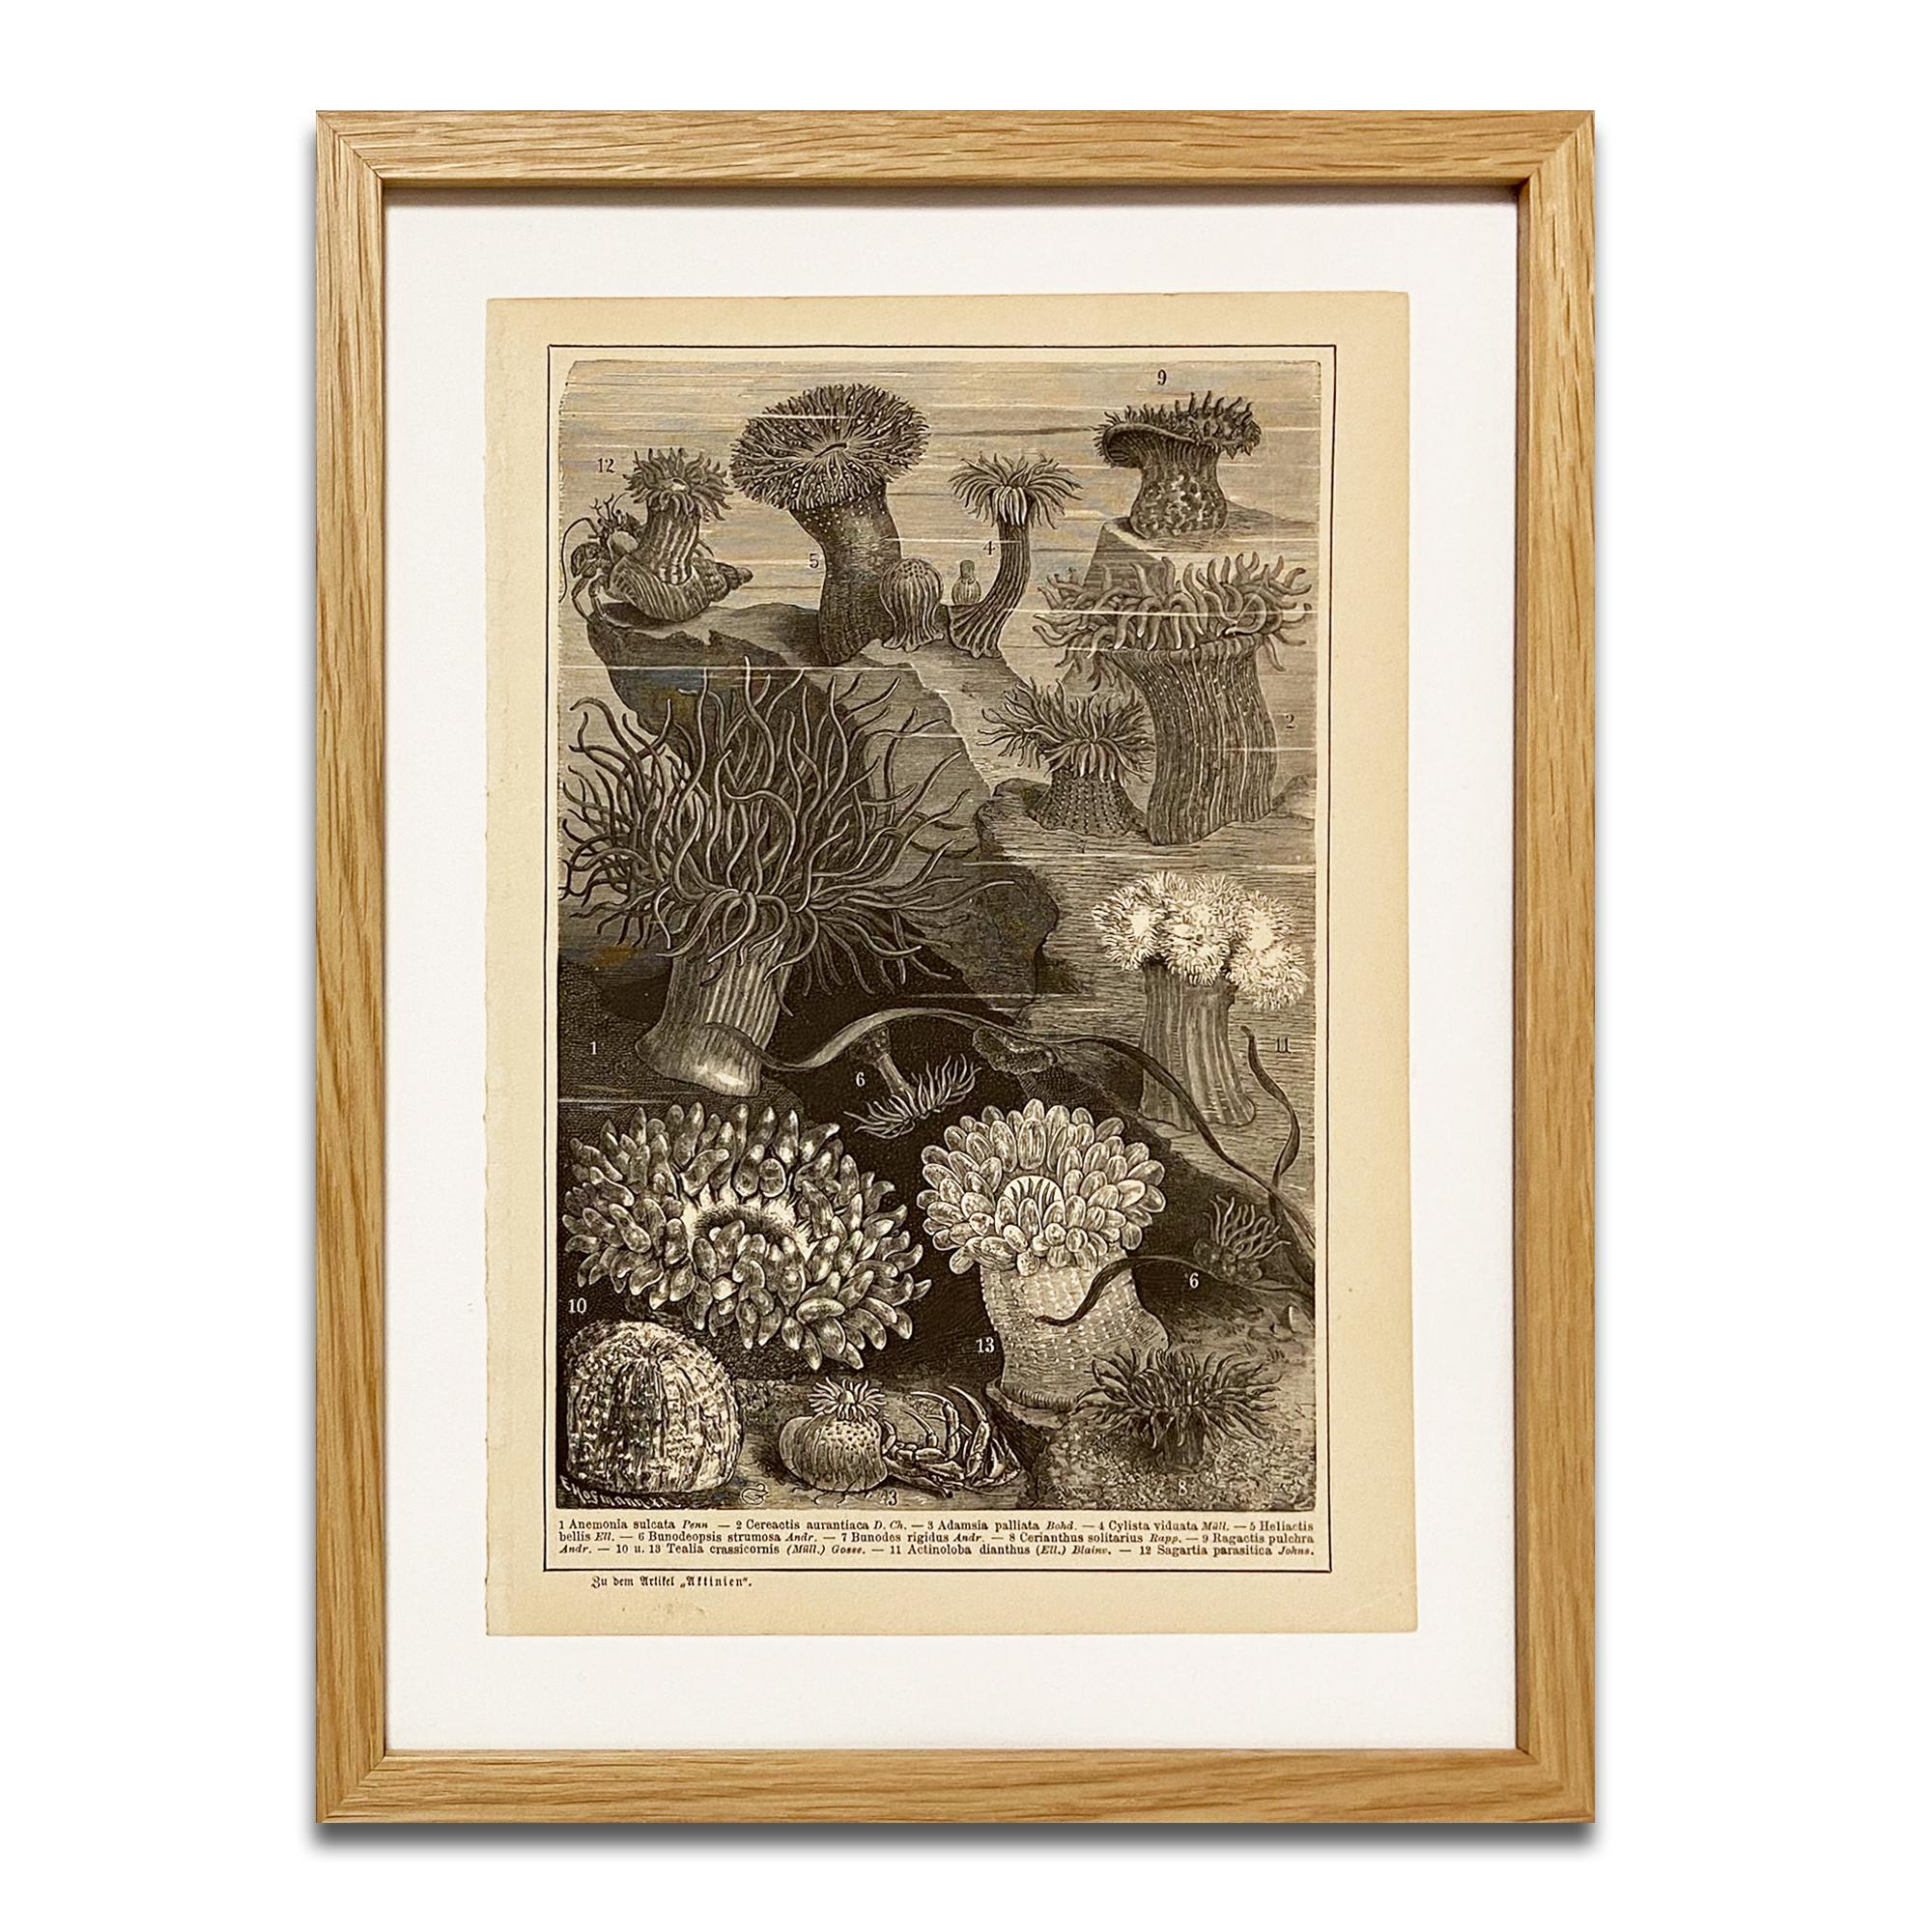 Unknown Interior Print - Anemone Print in Wooden Frame, from Antiquarian Encyclopedia, Botanical Prints